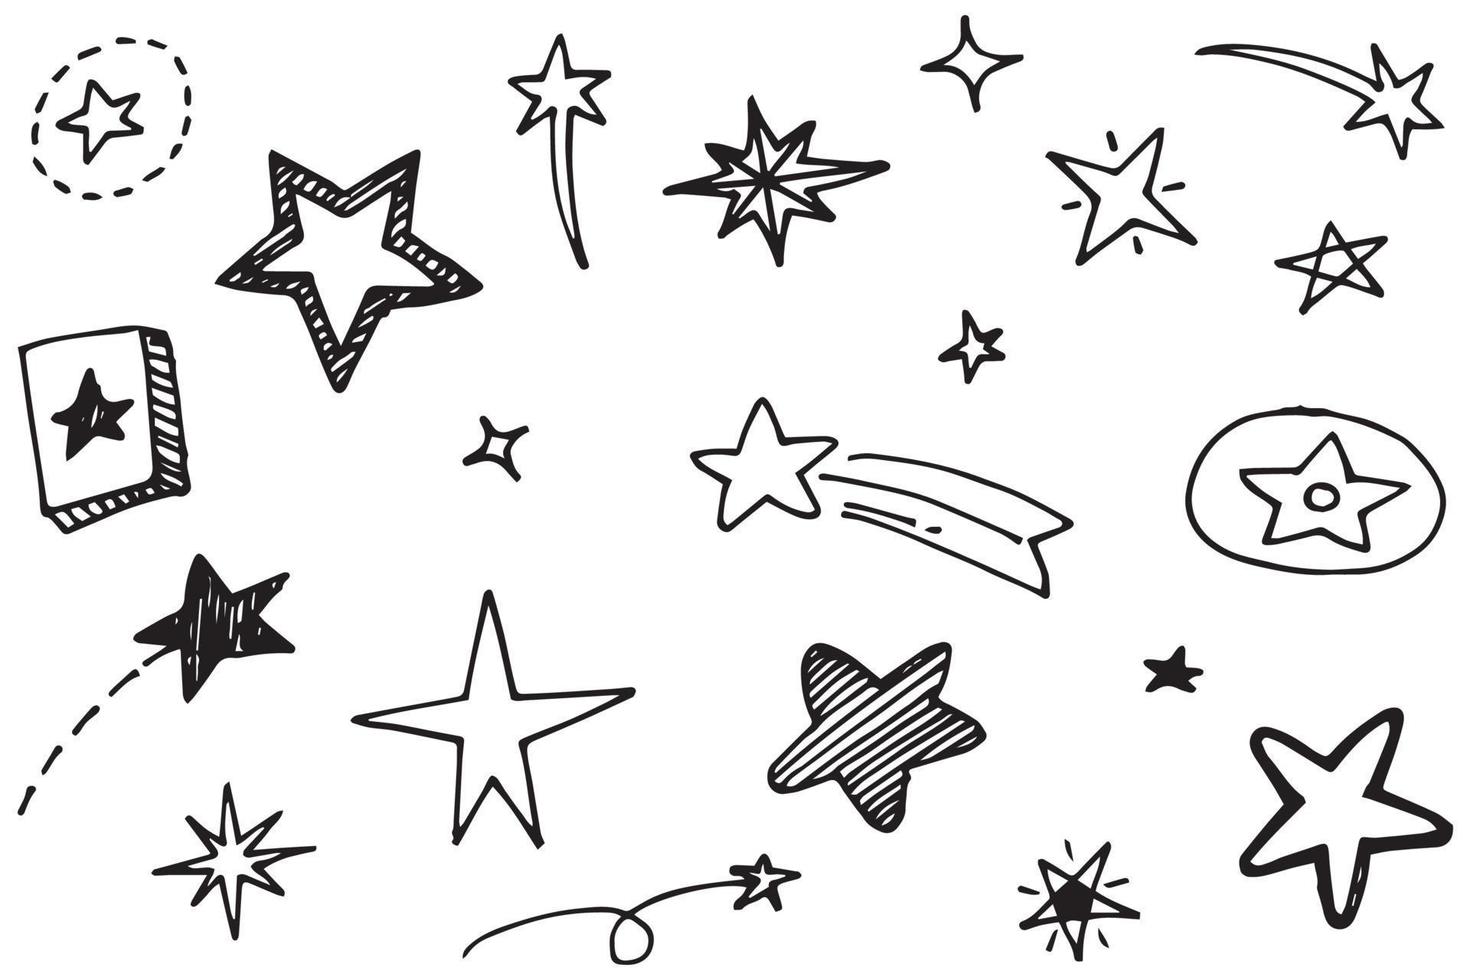 Set of black hand drawn doodle stars in isolated on white background. vector